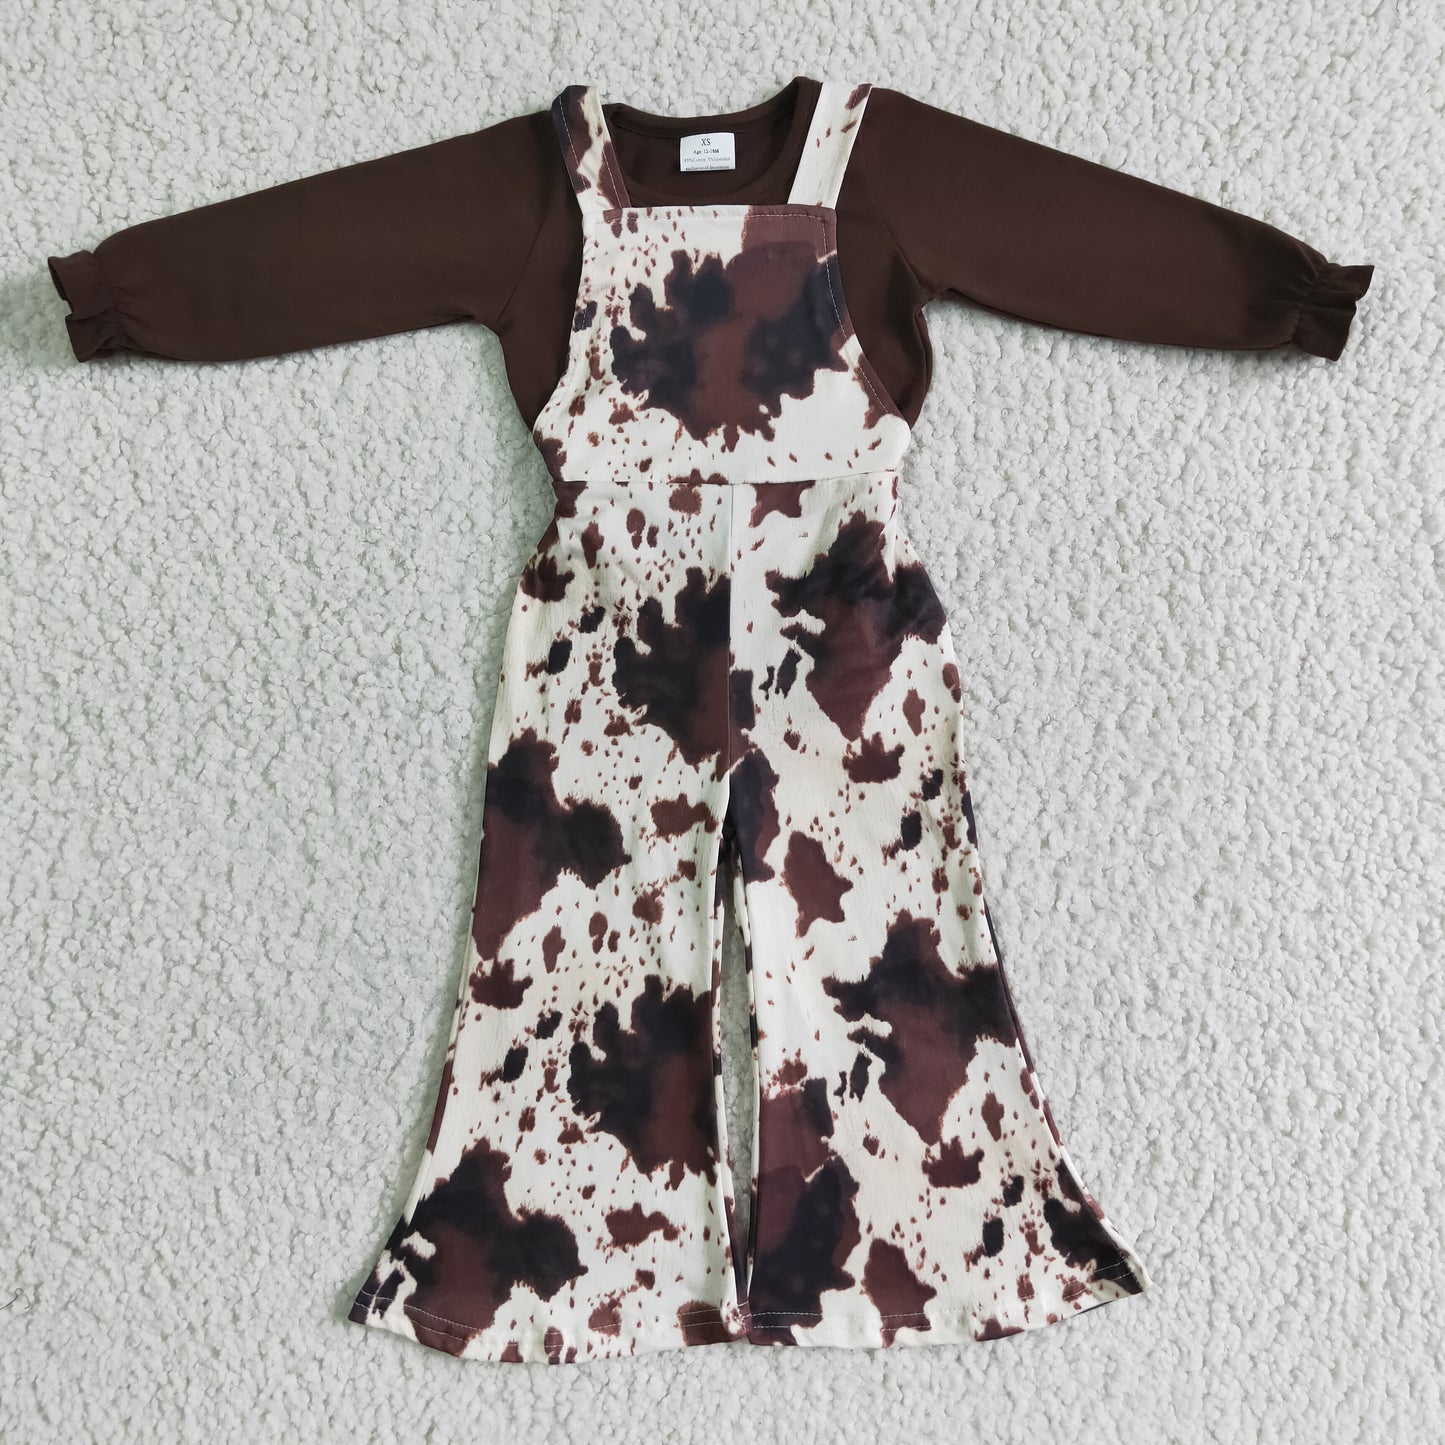 Brown cotton shirt cow print overalls girls clothing